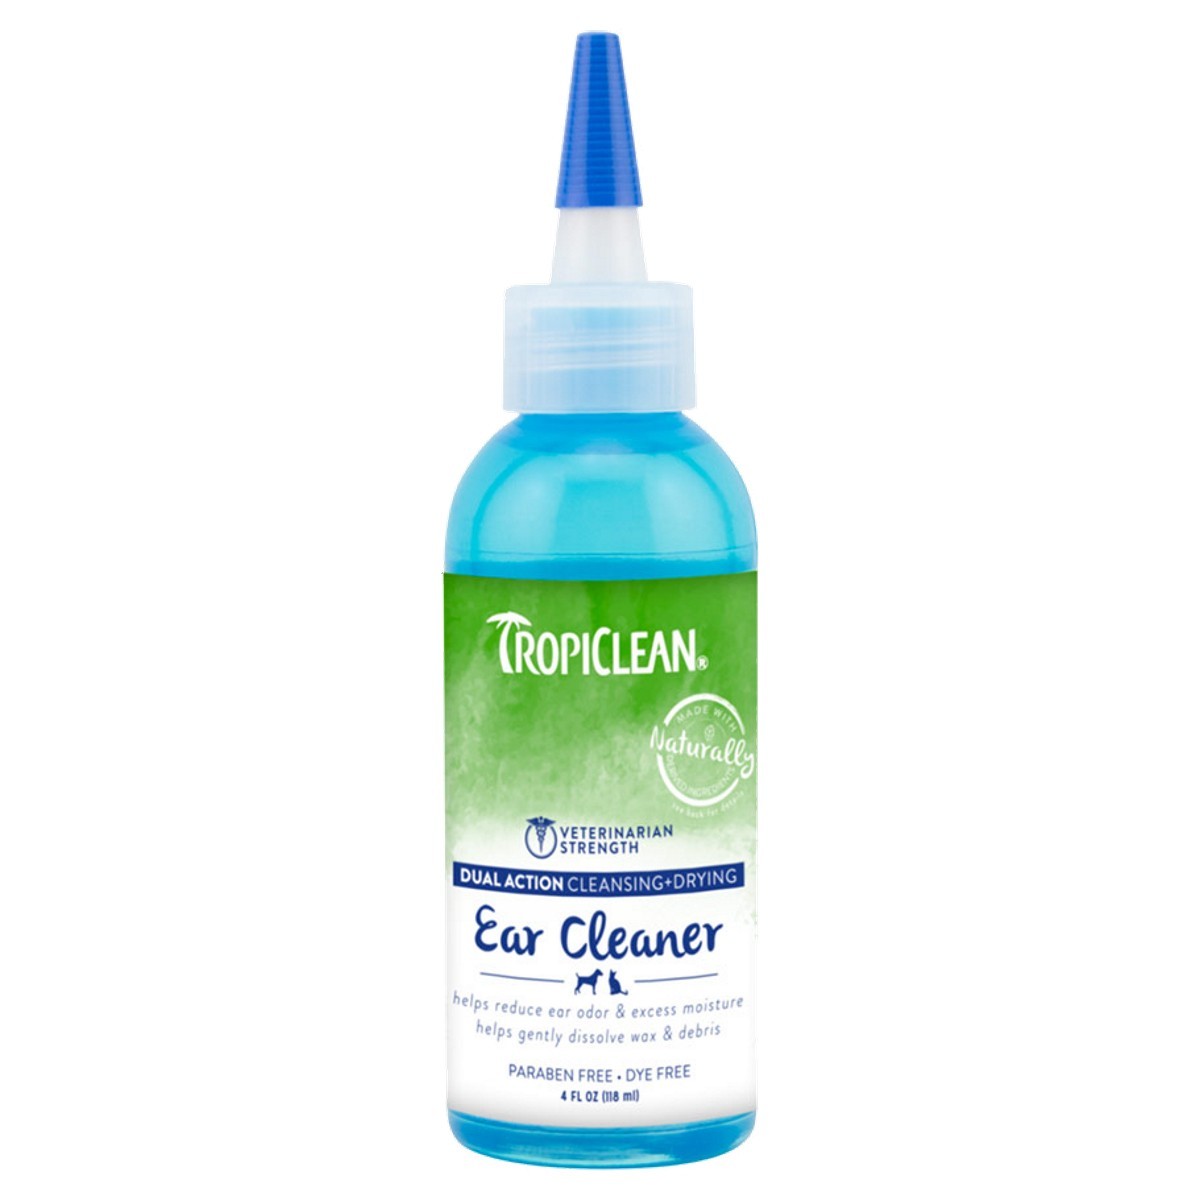 Dual Action Ear Cleaner for Pets - Tropiclean